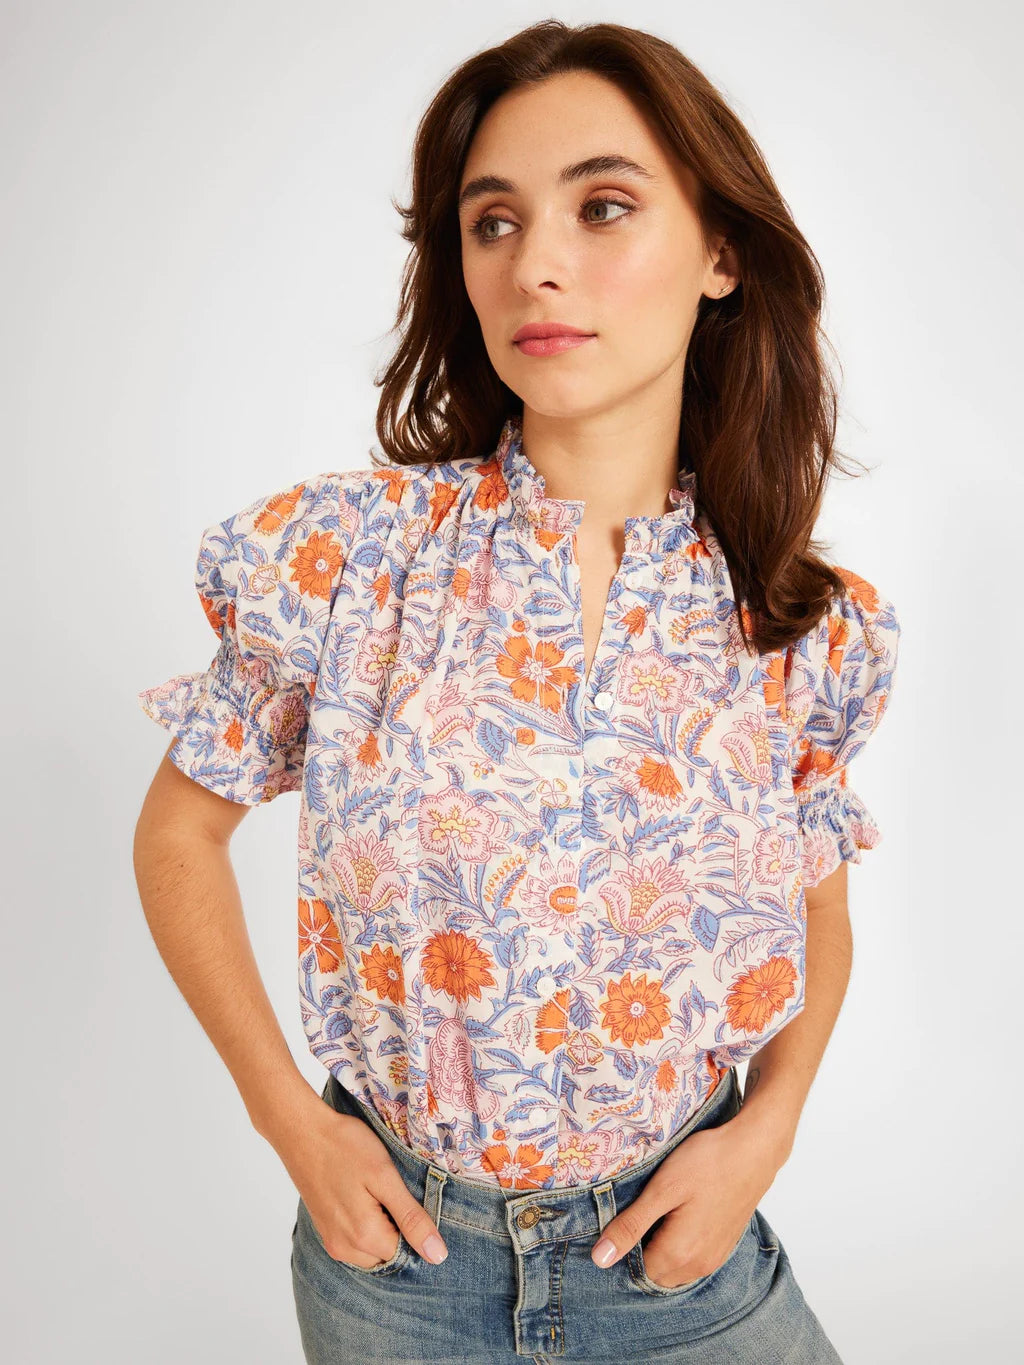 Mille Newport Floral Marnie Top